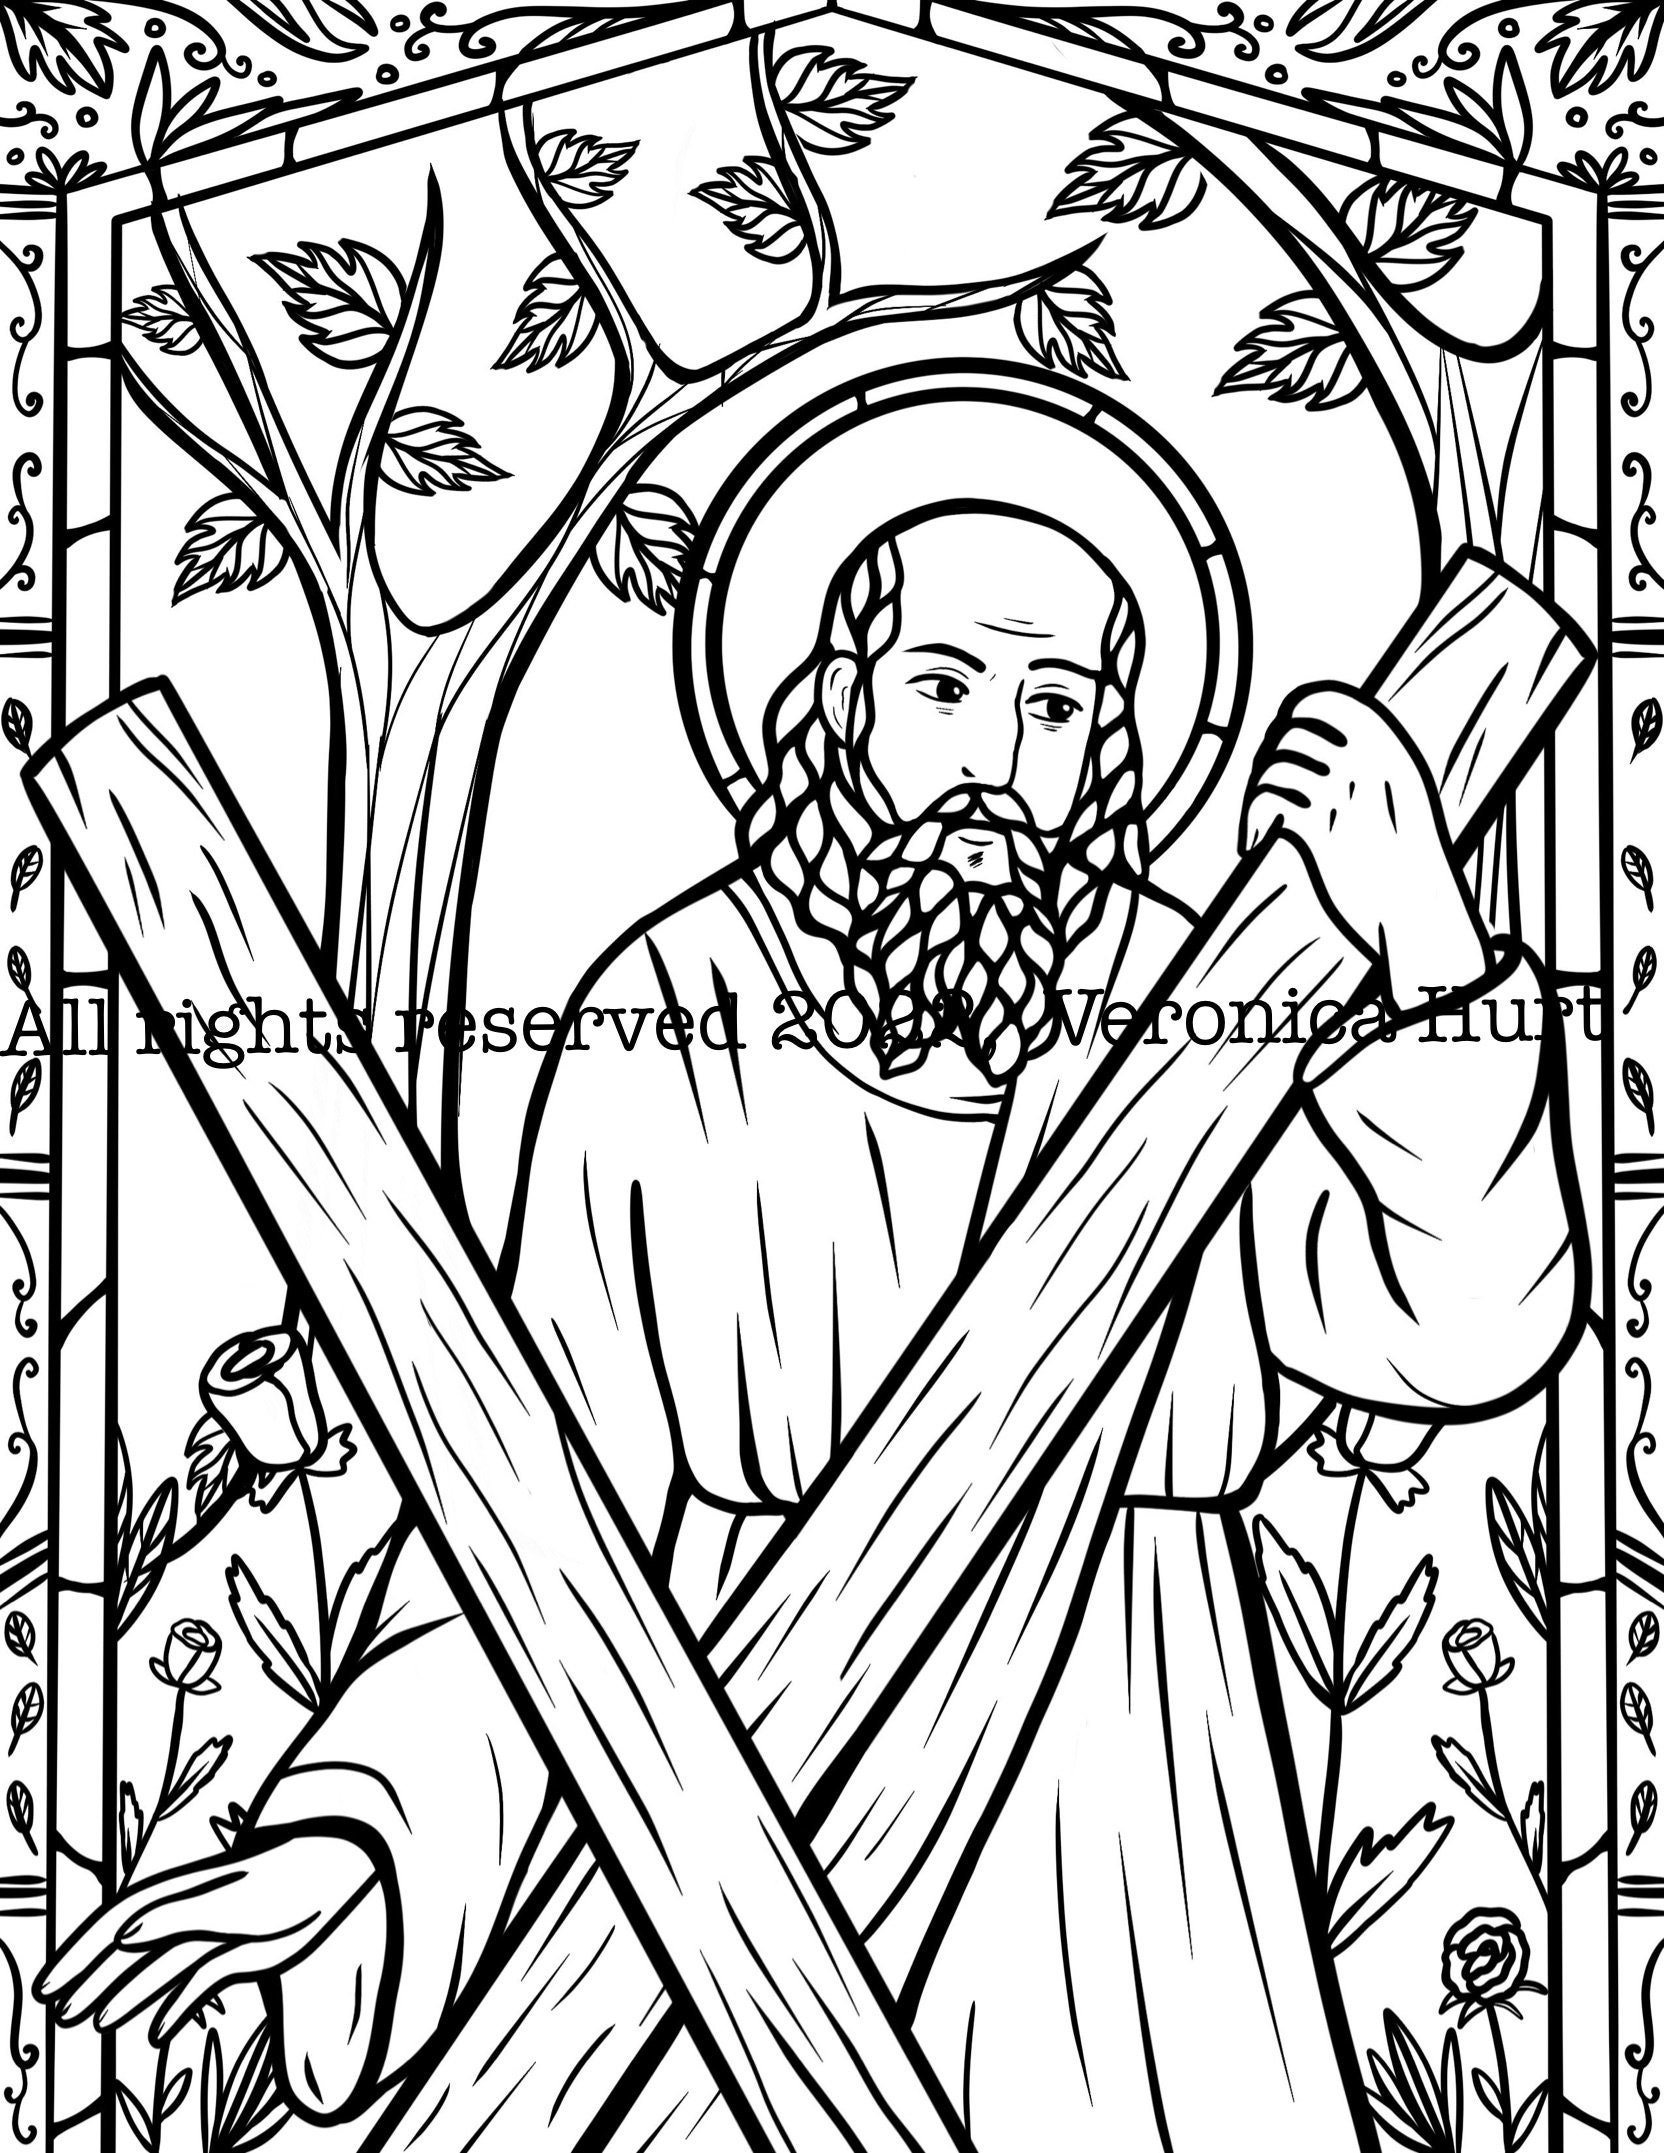 St andrew catholic coloring page stained glass for kids and adults